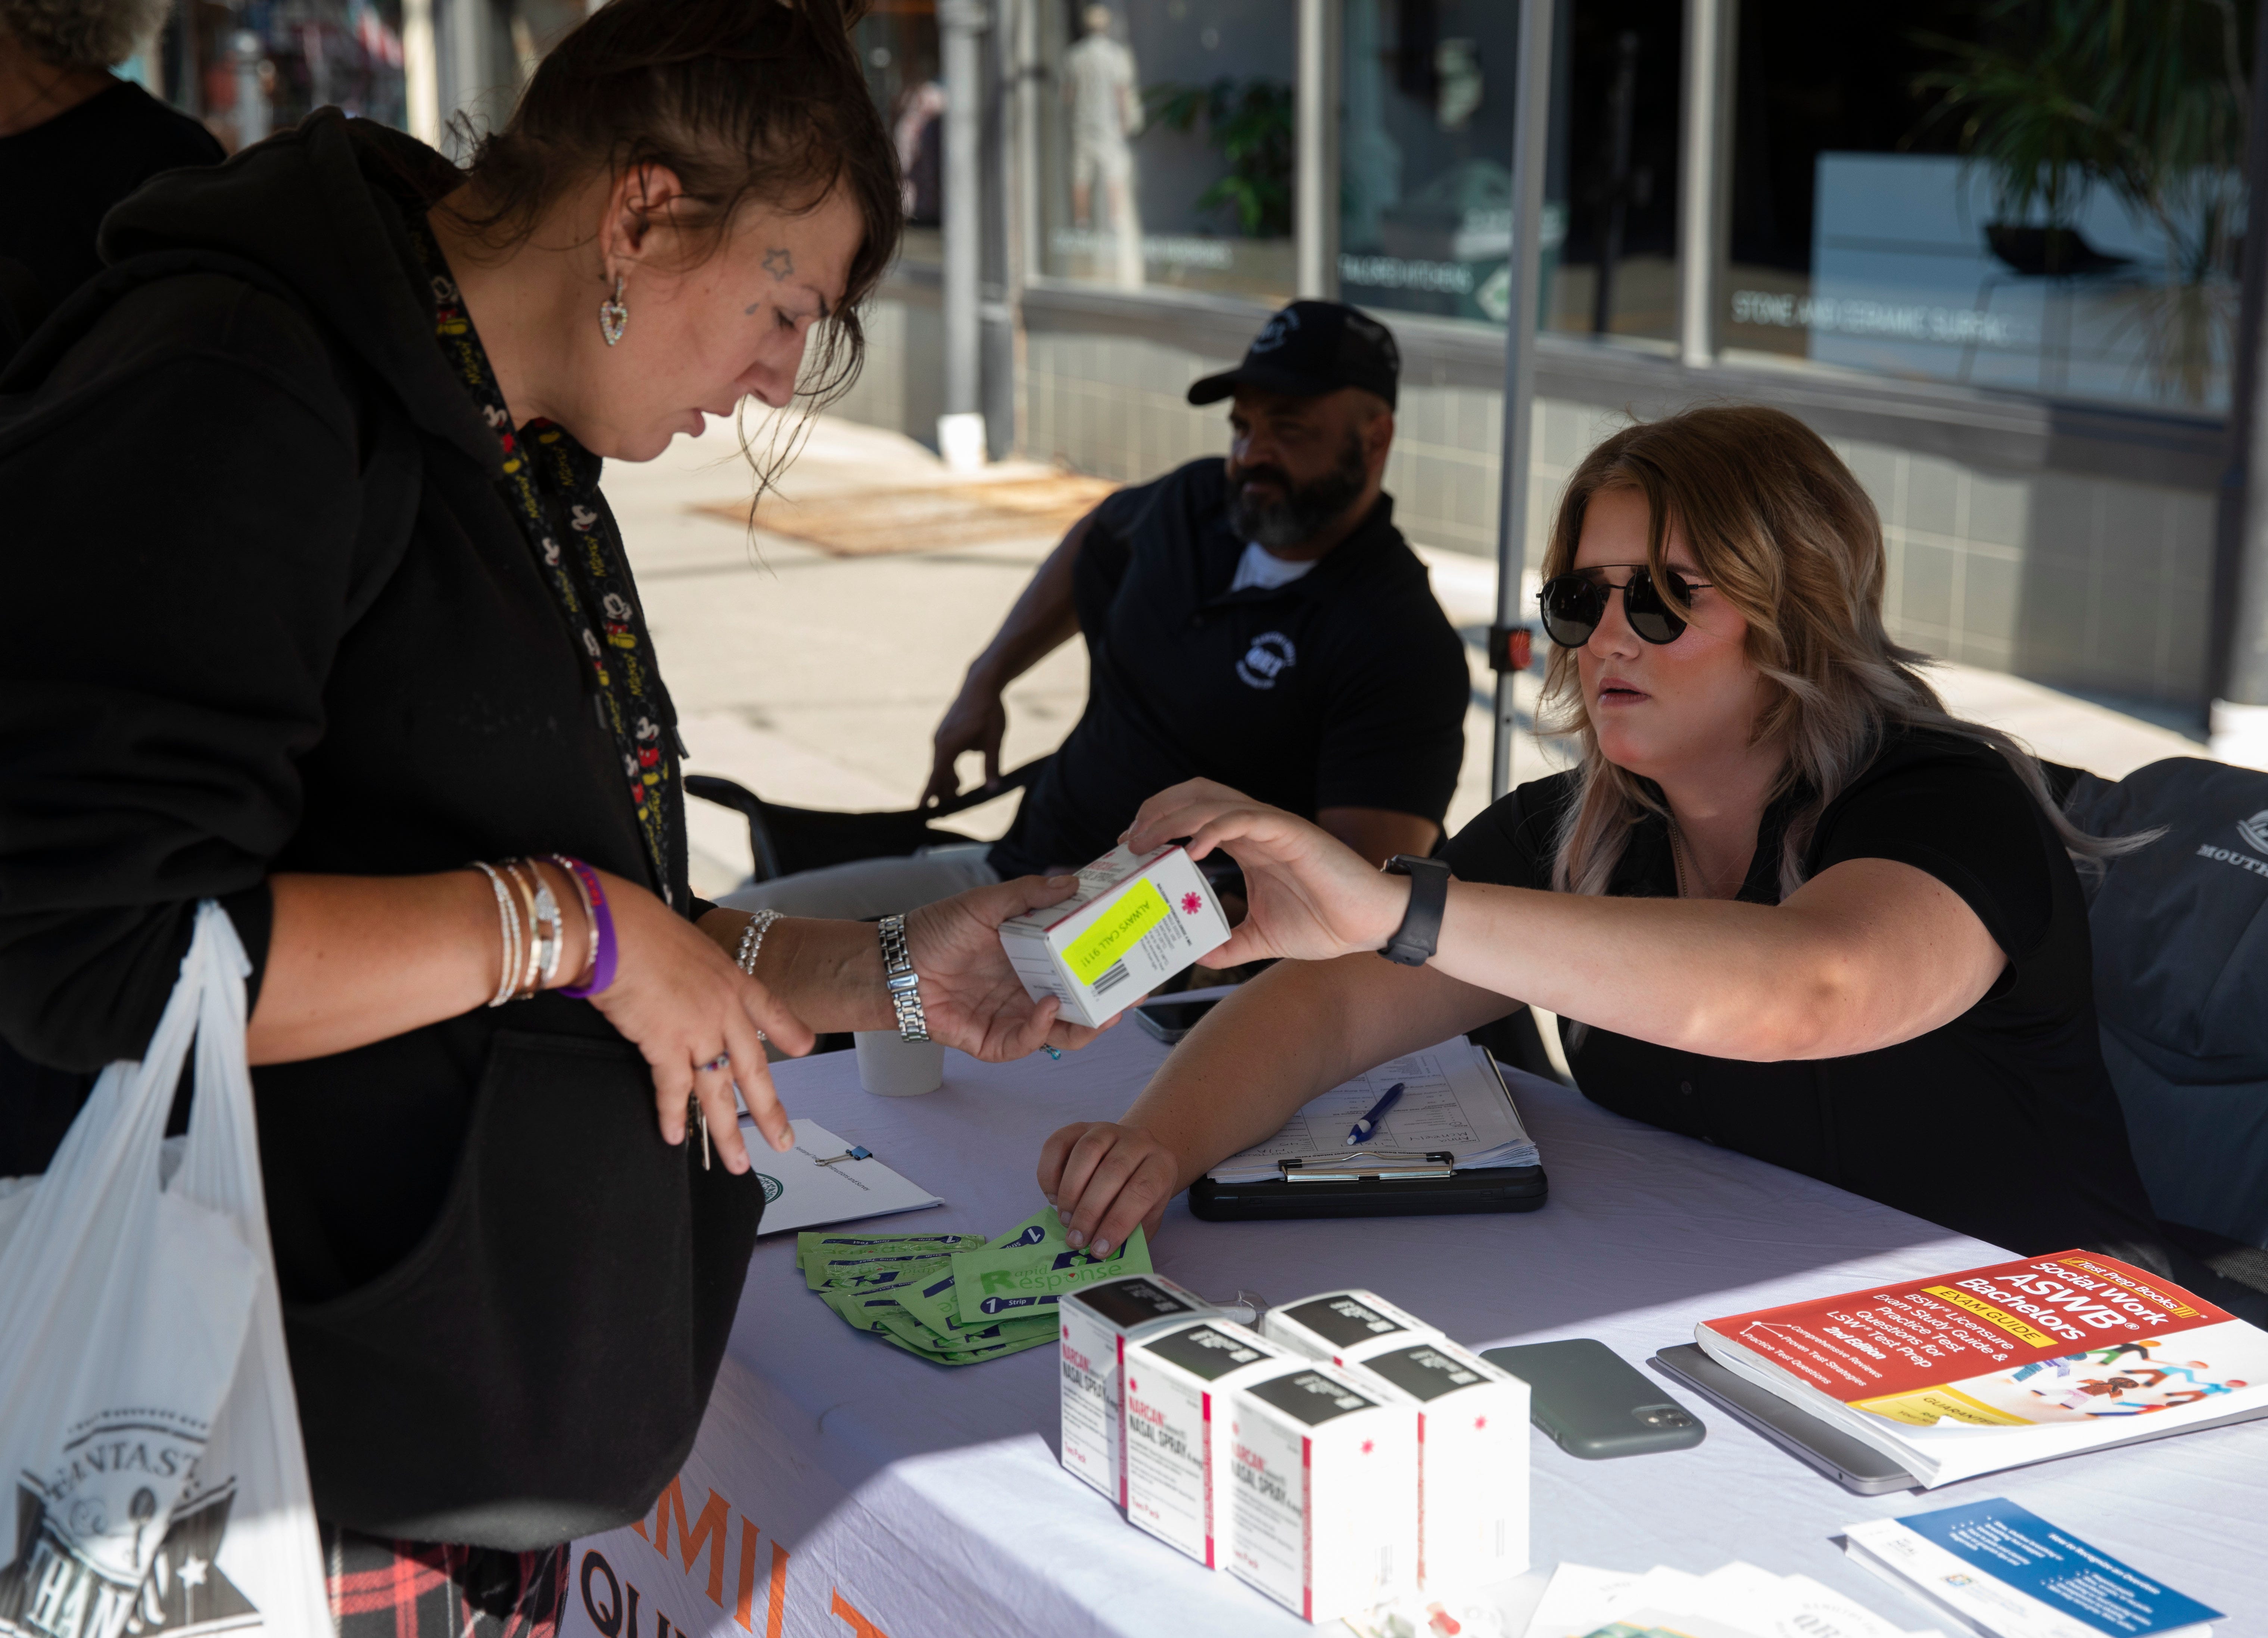 Alyssa Boiman, a social worker with the Quick Response team, talks with a woman from Bond Hill at Findlay Market, Friday, July 15, 2022. The woman was given Narcan and fentanyl test strips.